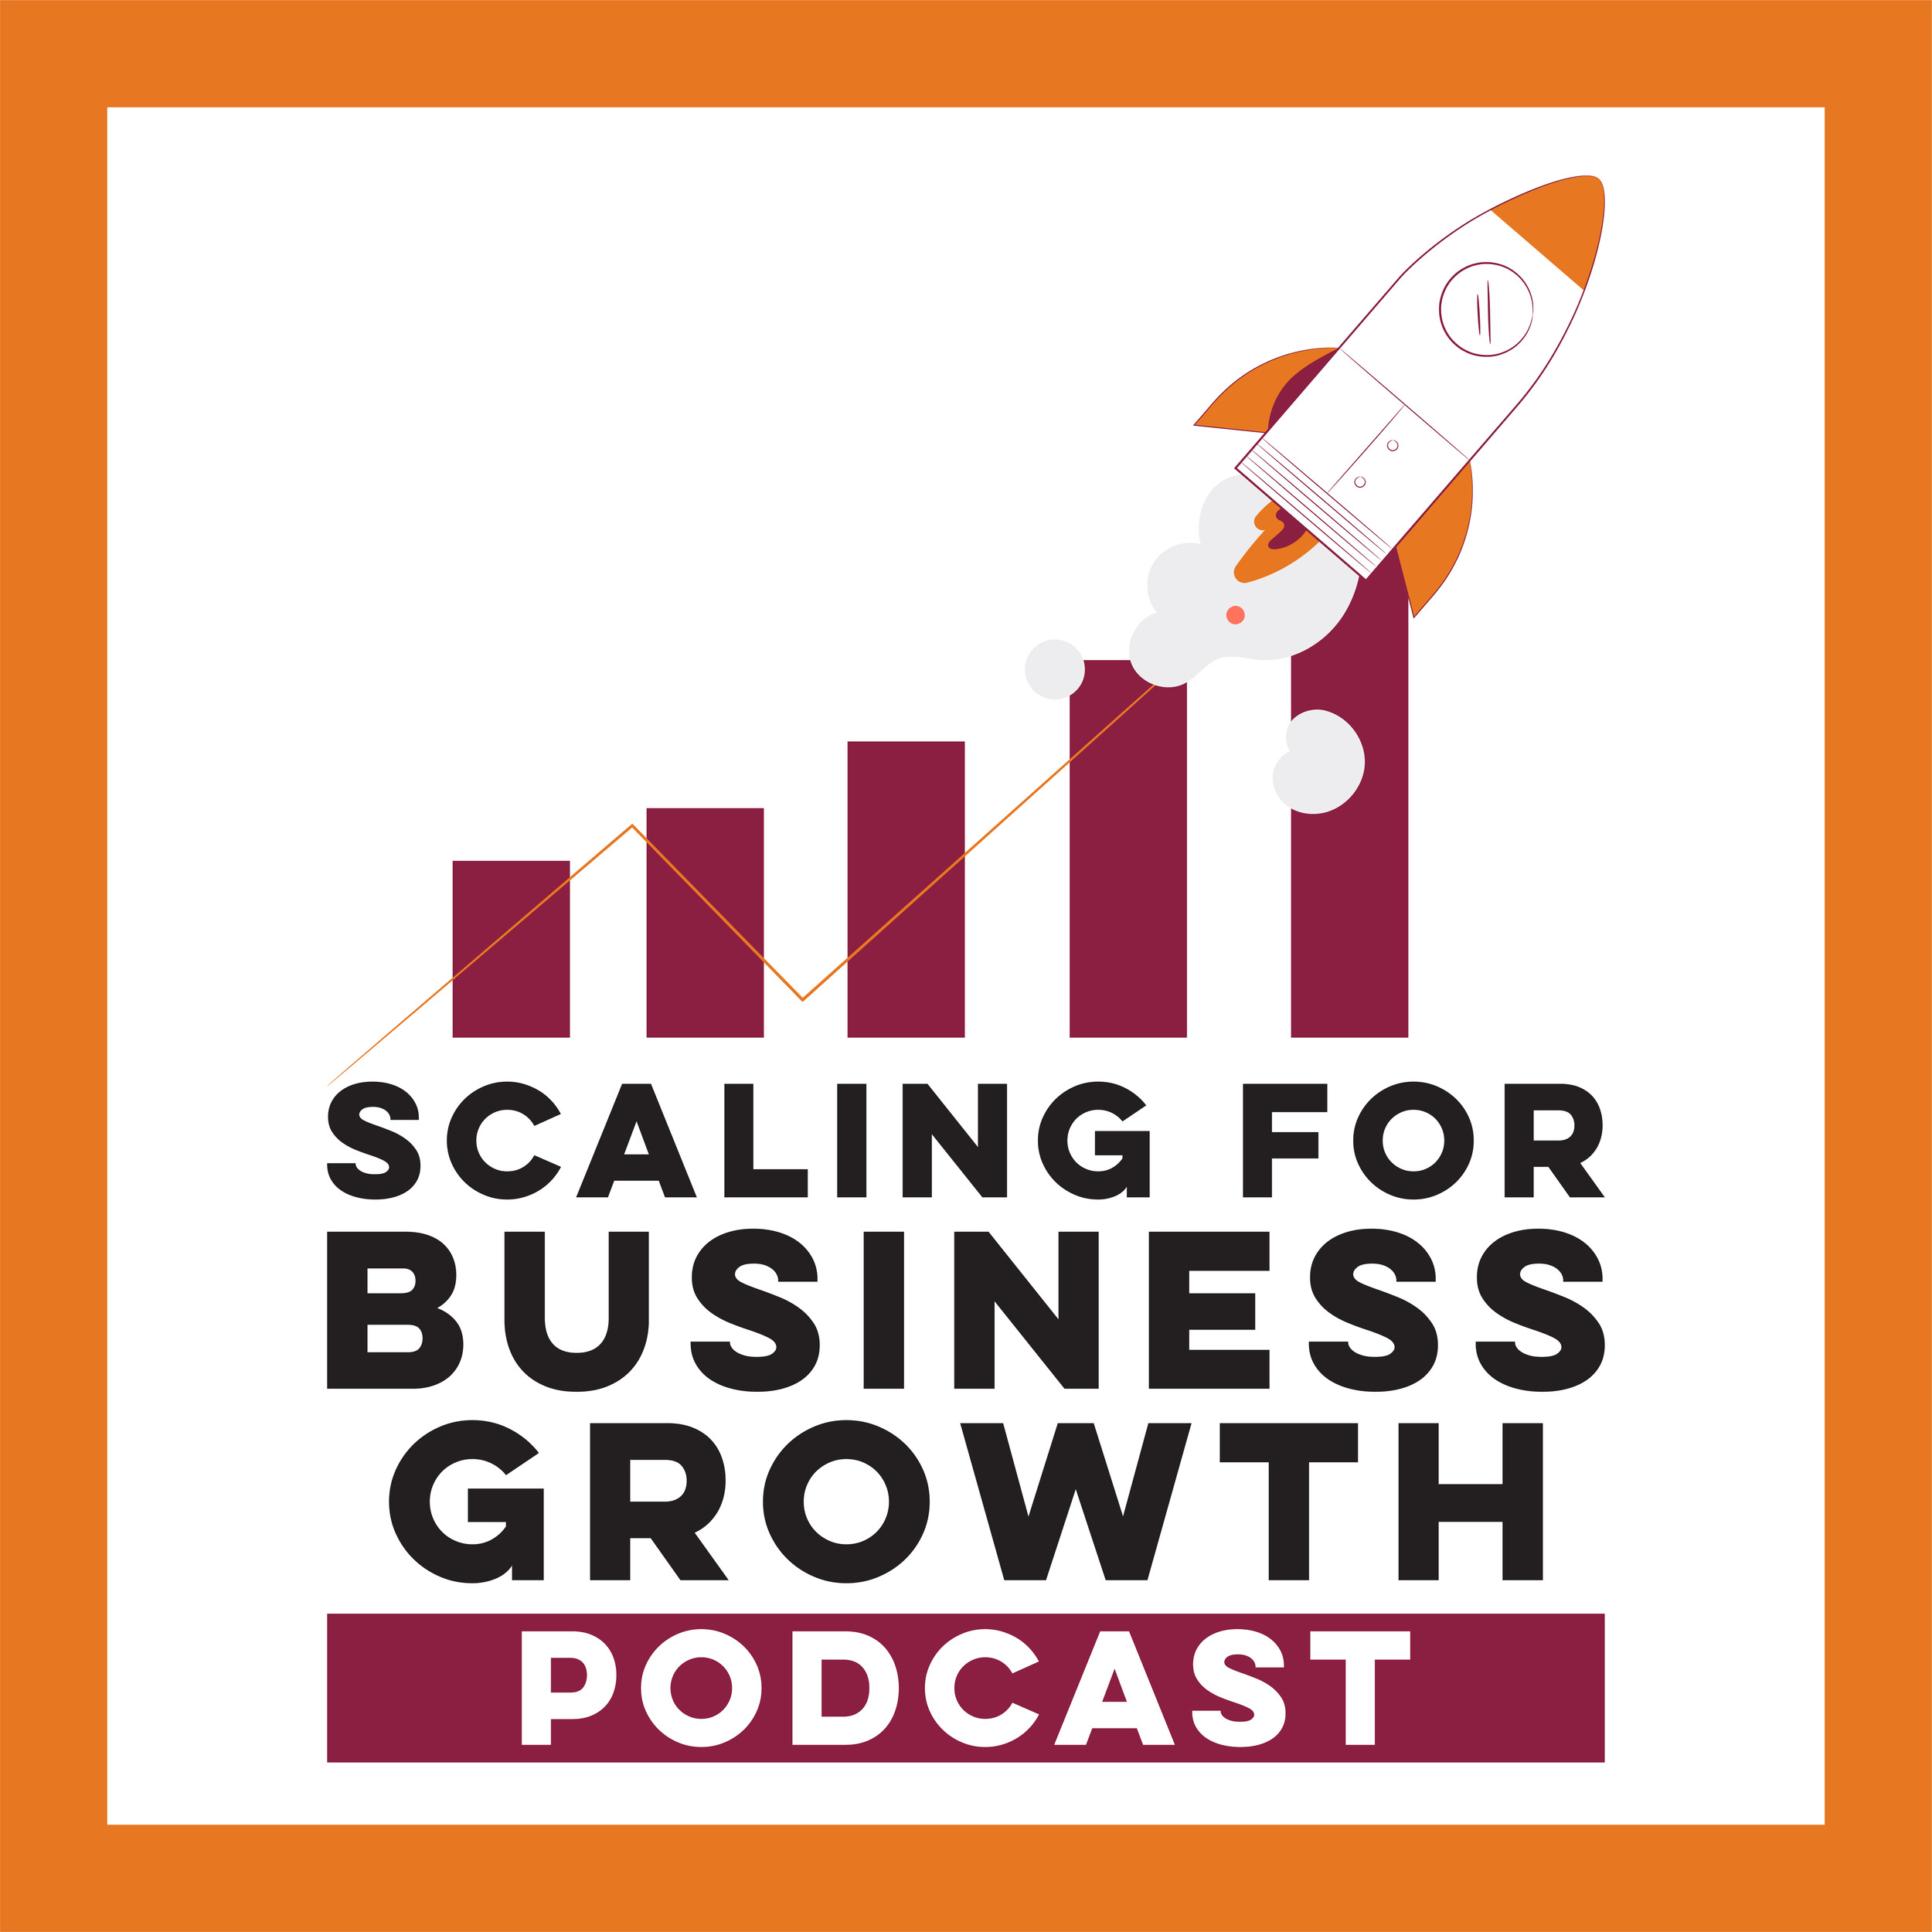 Artwork for podcast Scaling For Business Growth Podcast